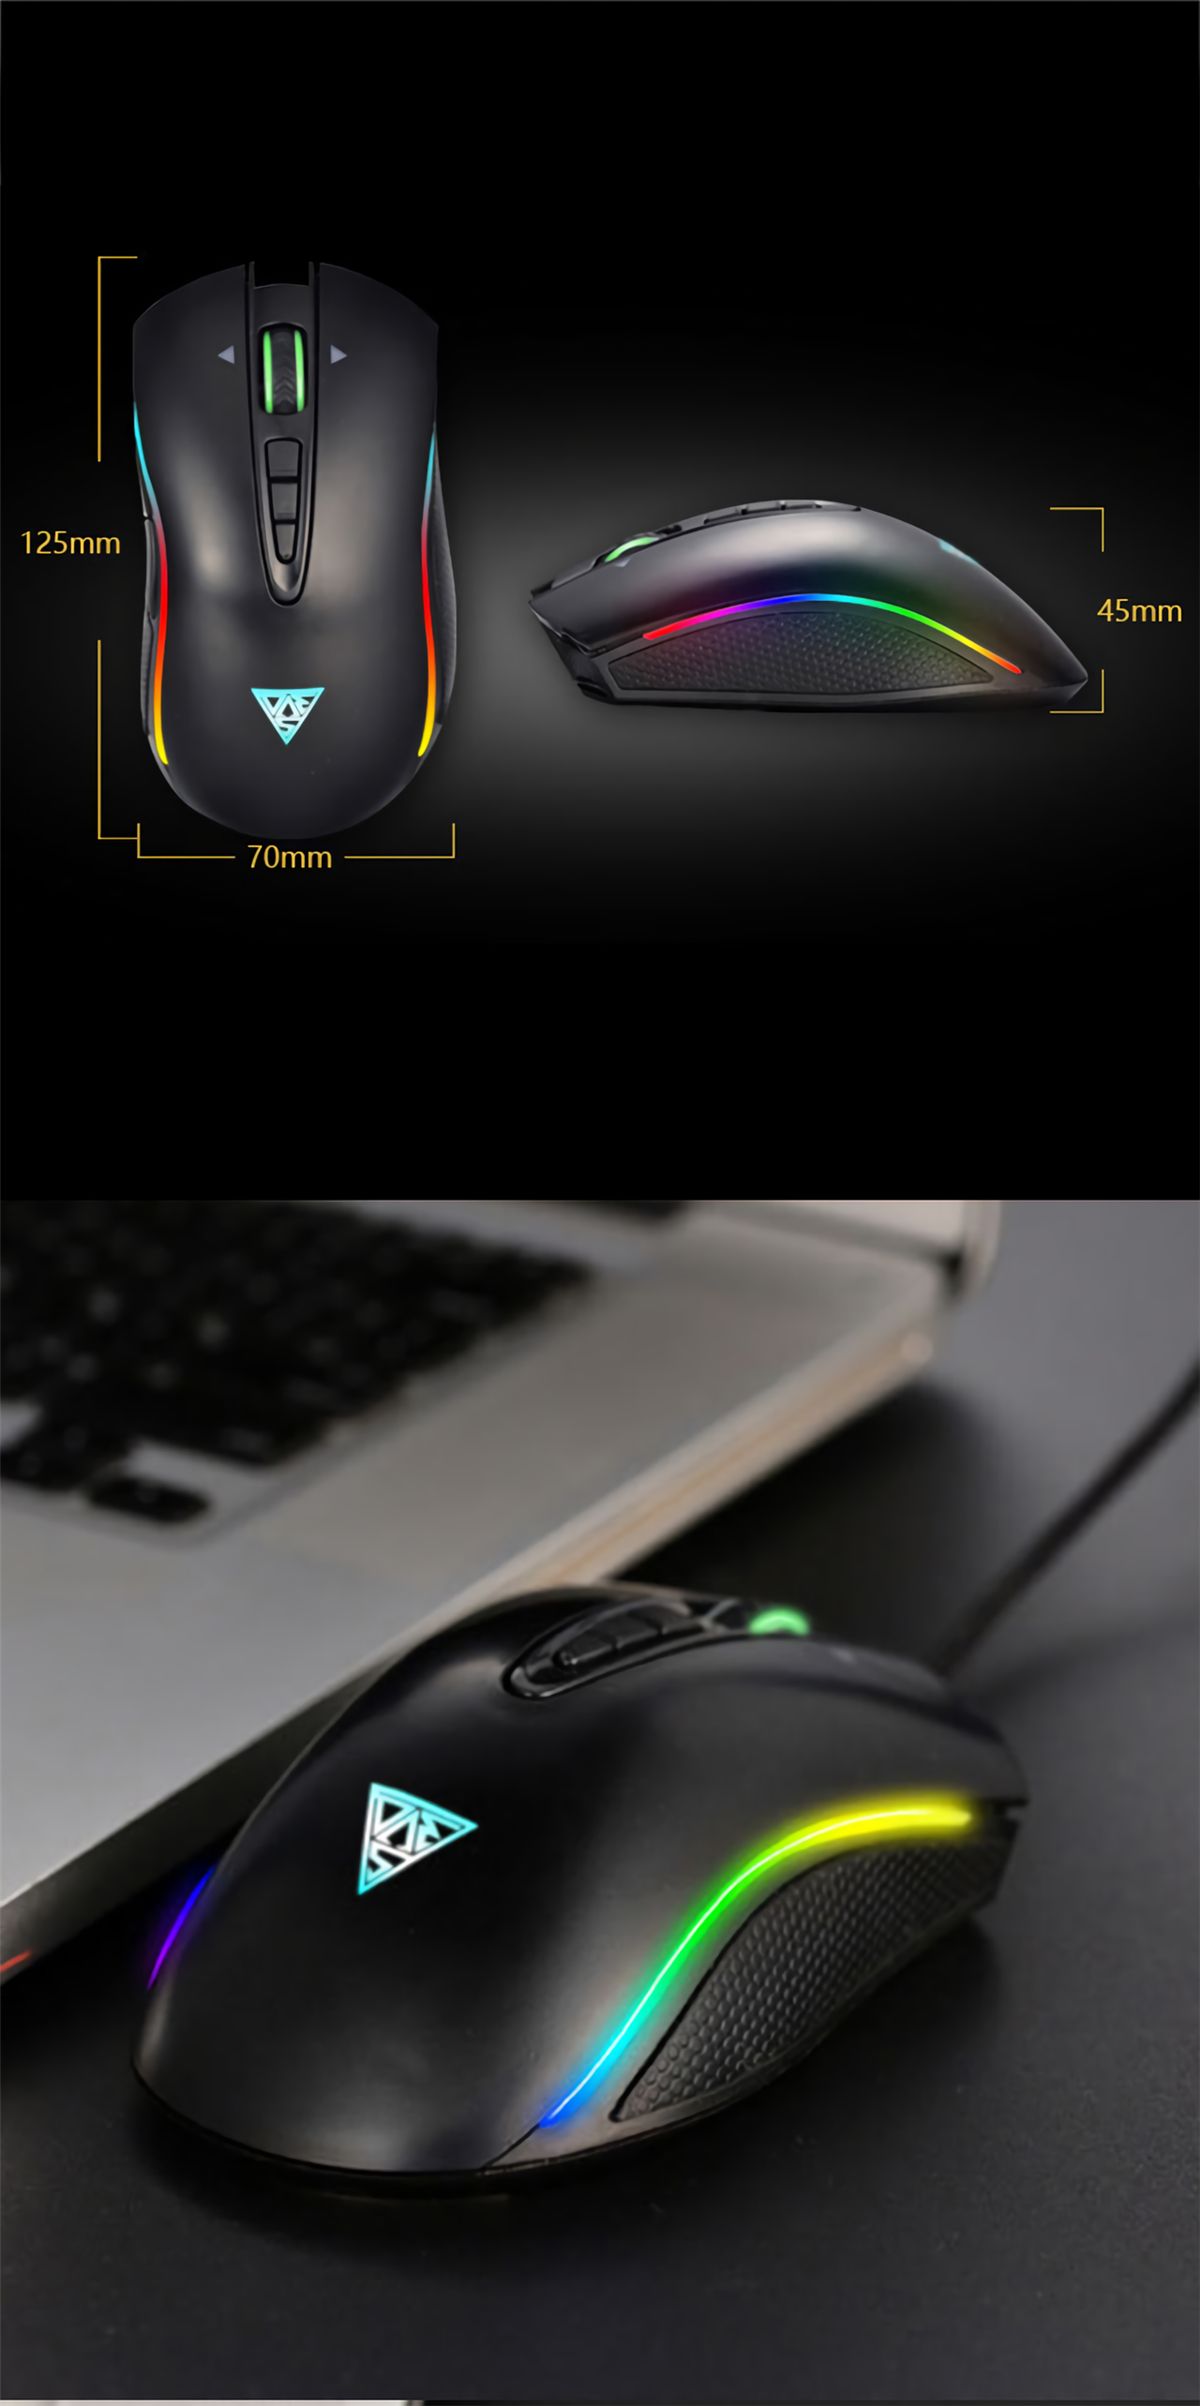 GAMEDIAS-M8-Mamba-Wired-RGB-Light-Gaming-Mouse-4000DPI-RGB-Backlit-7-Buttons-Mouse-1662774